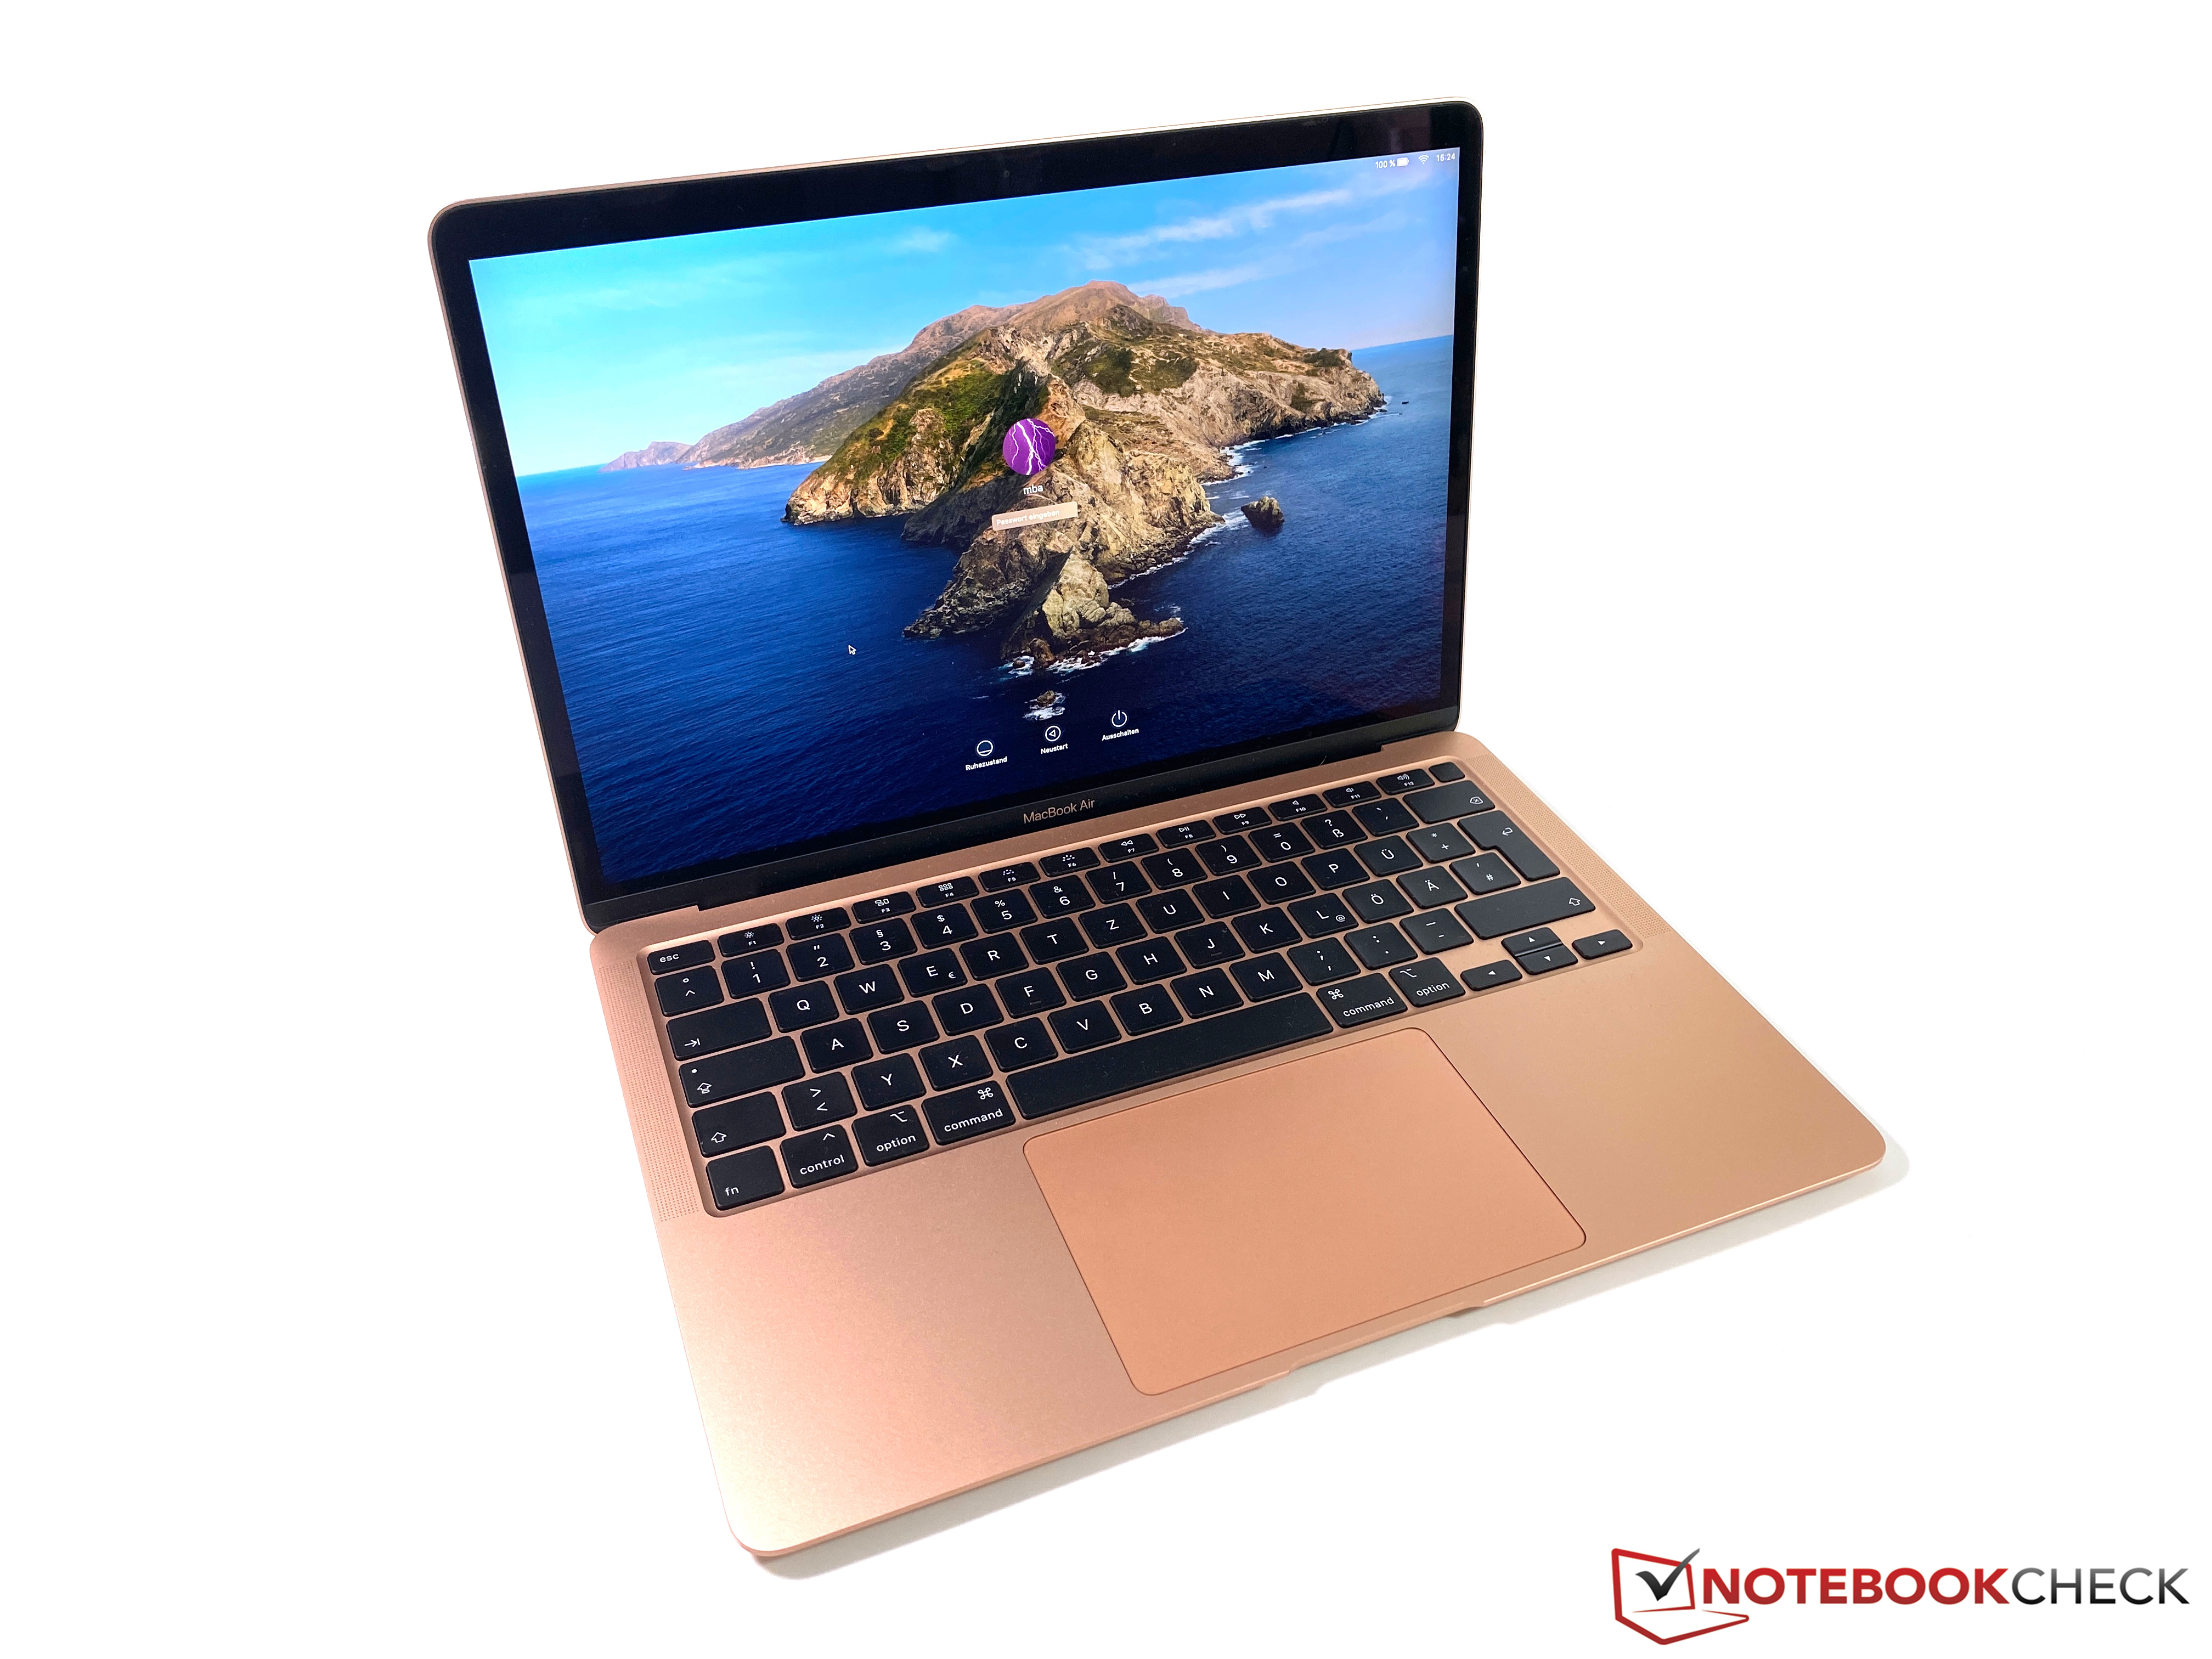  Apple MacBook Air 2021  Review Is the Core i3 the better 